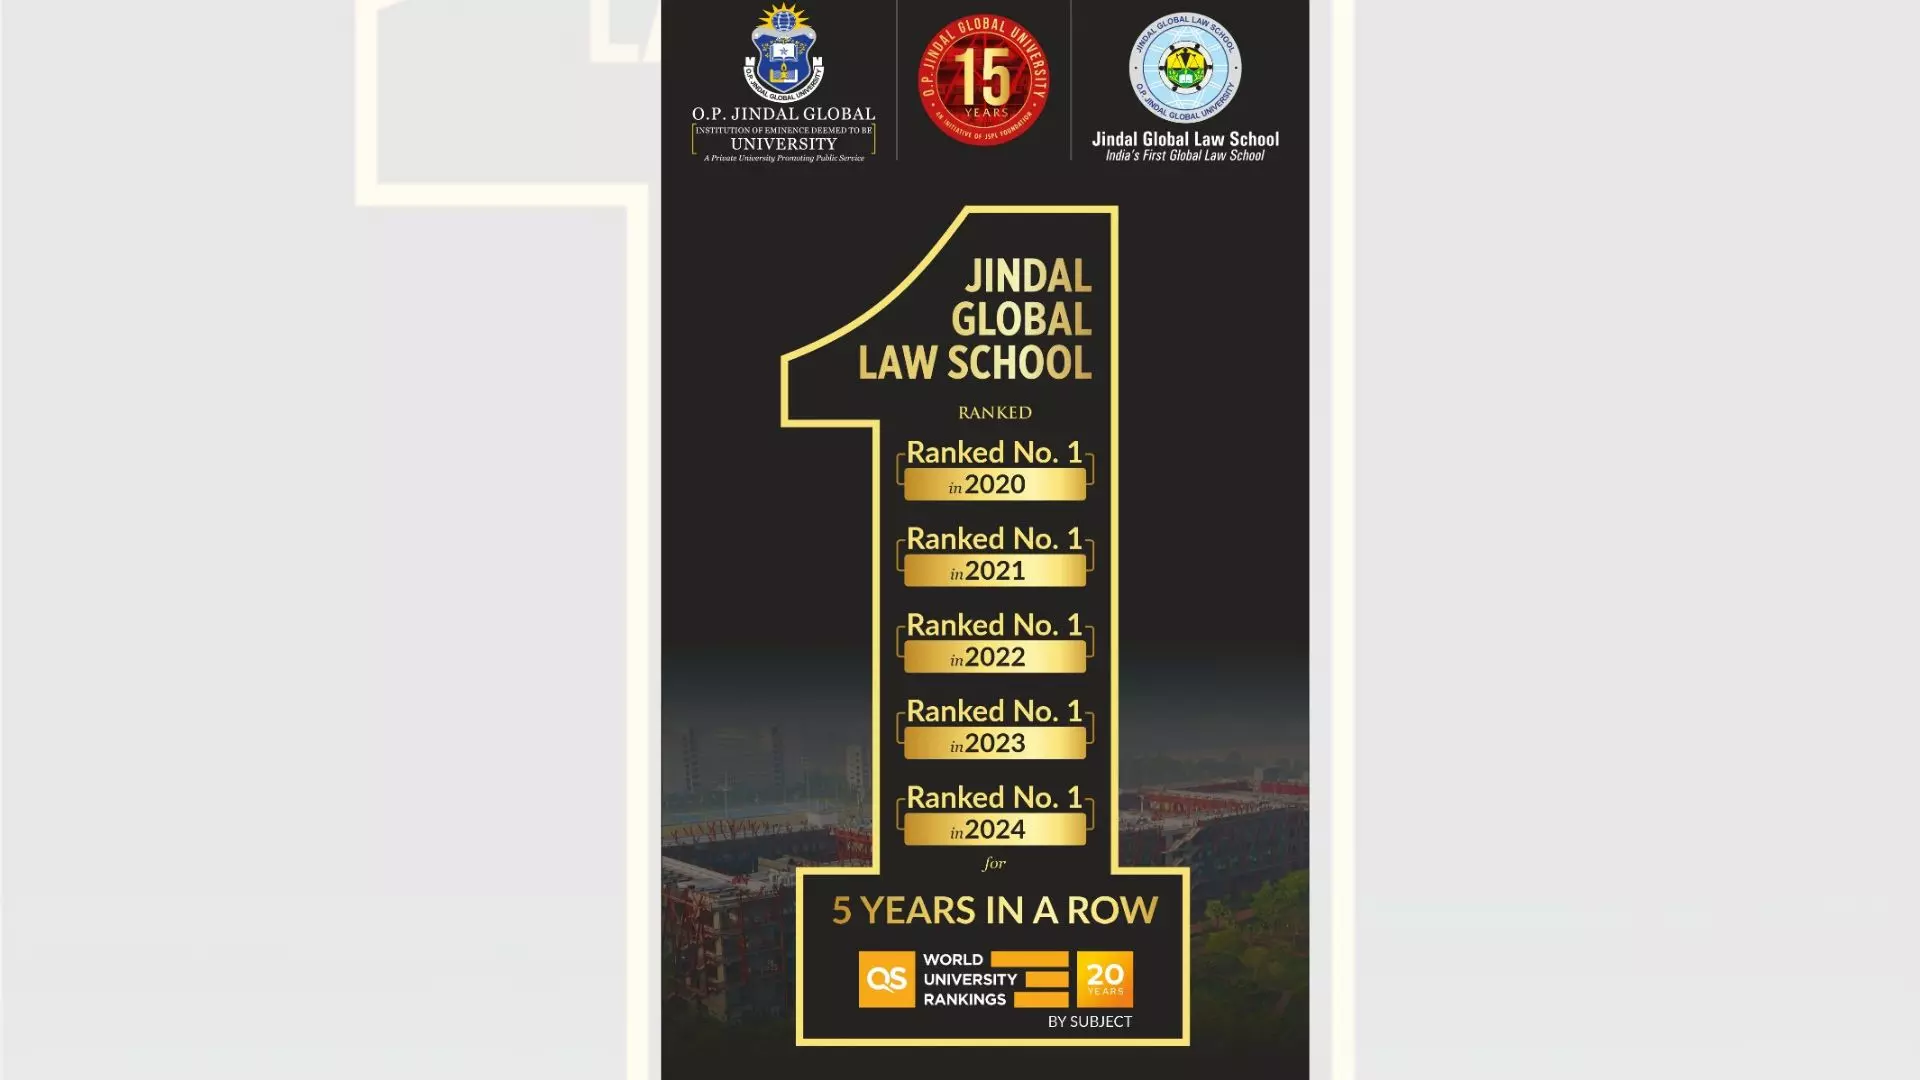 JGLS Ranked India’s Top Law School for 5th Year in a Row